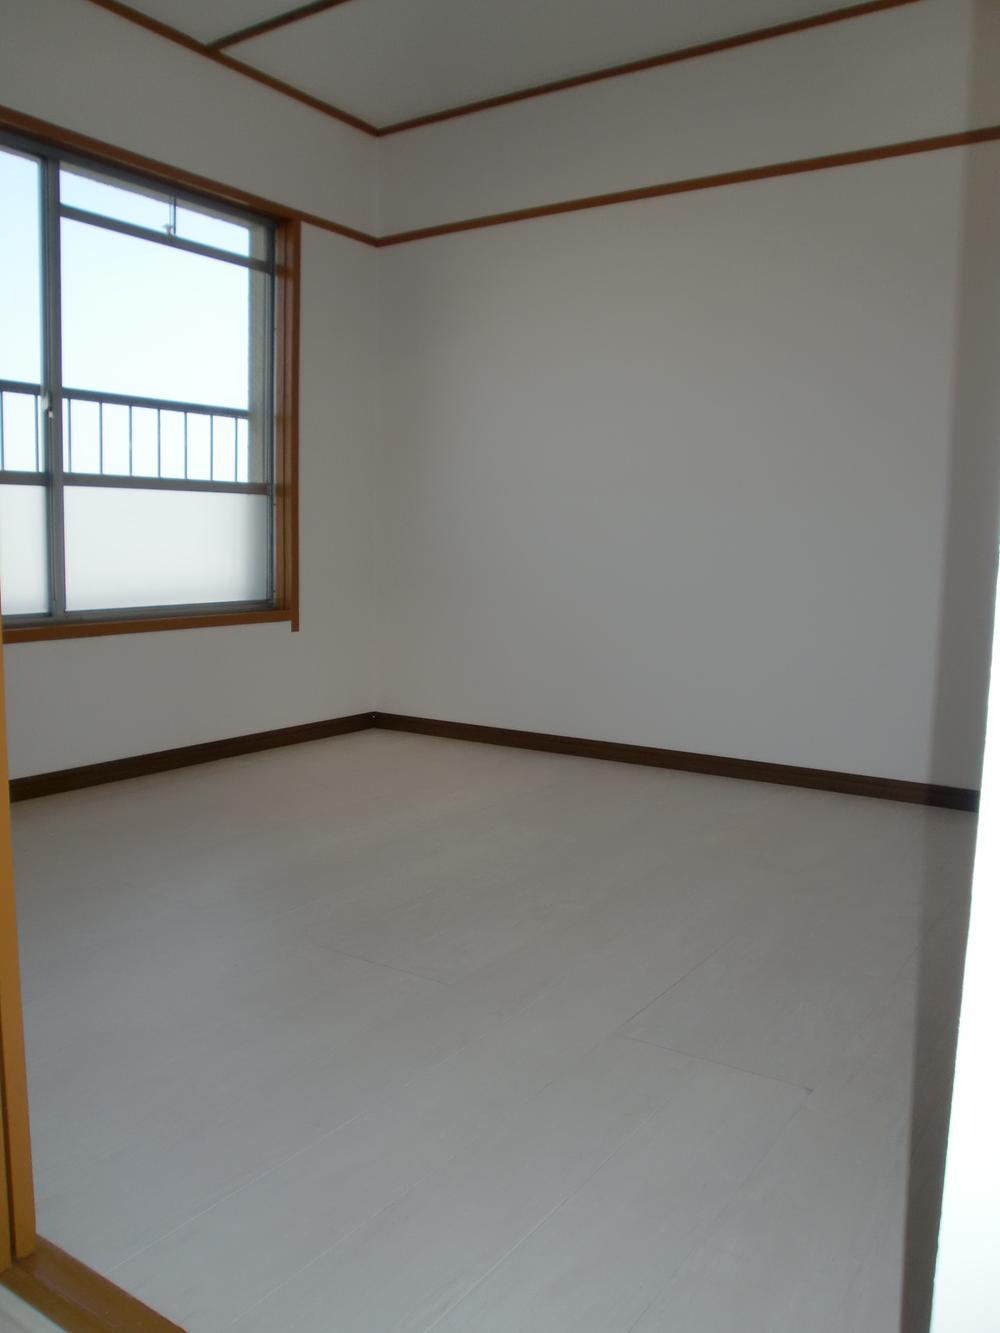 Non-living room. It feels widely There is a feeling of cleanliness in the white floor.